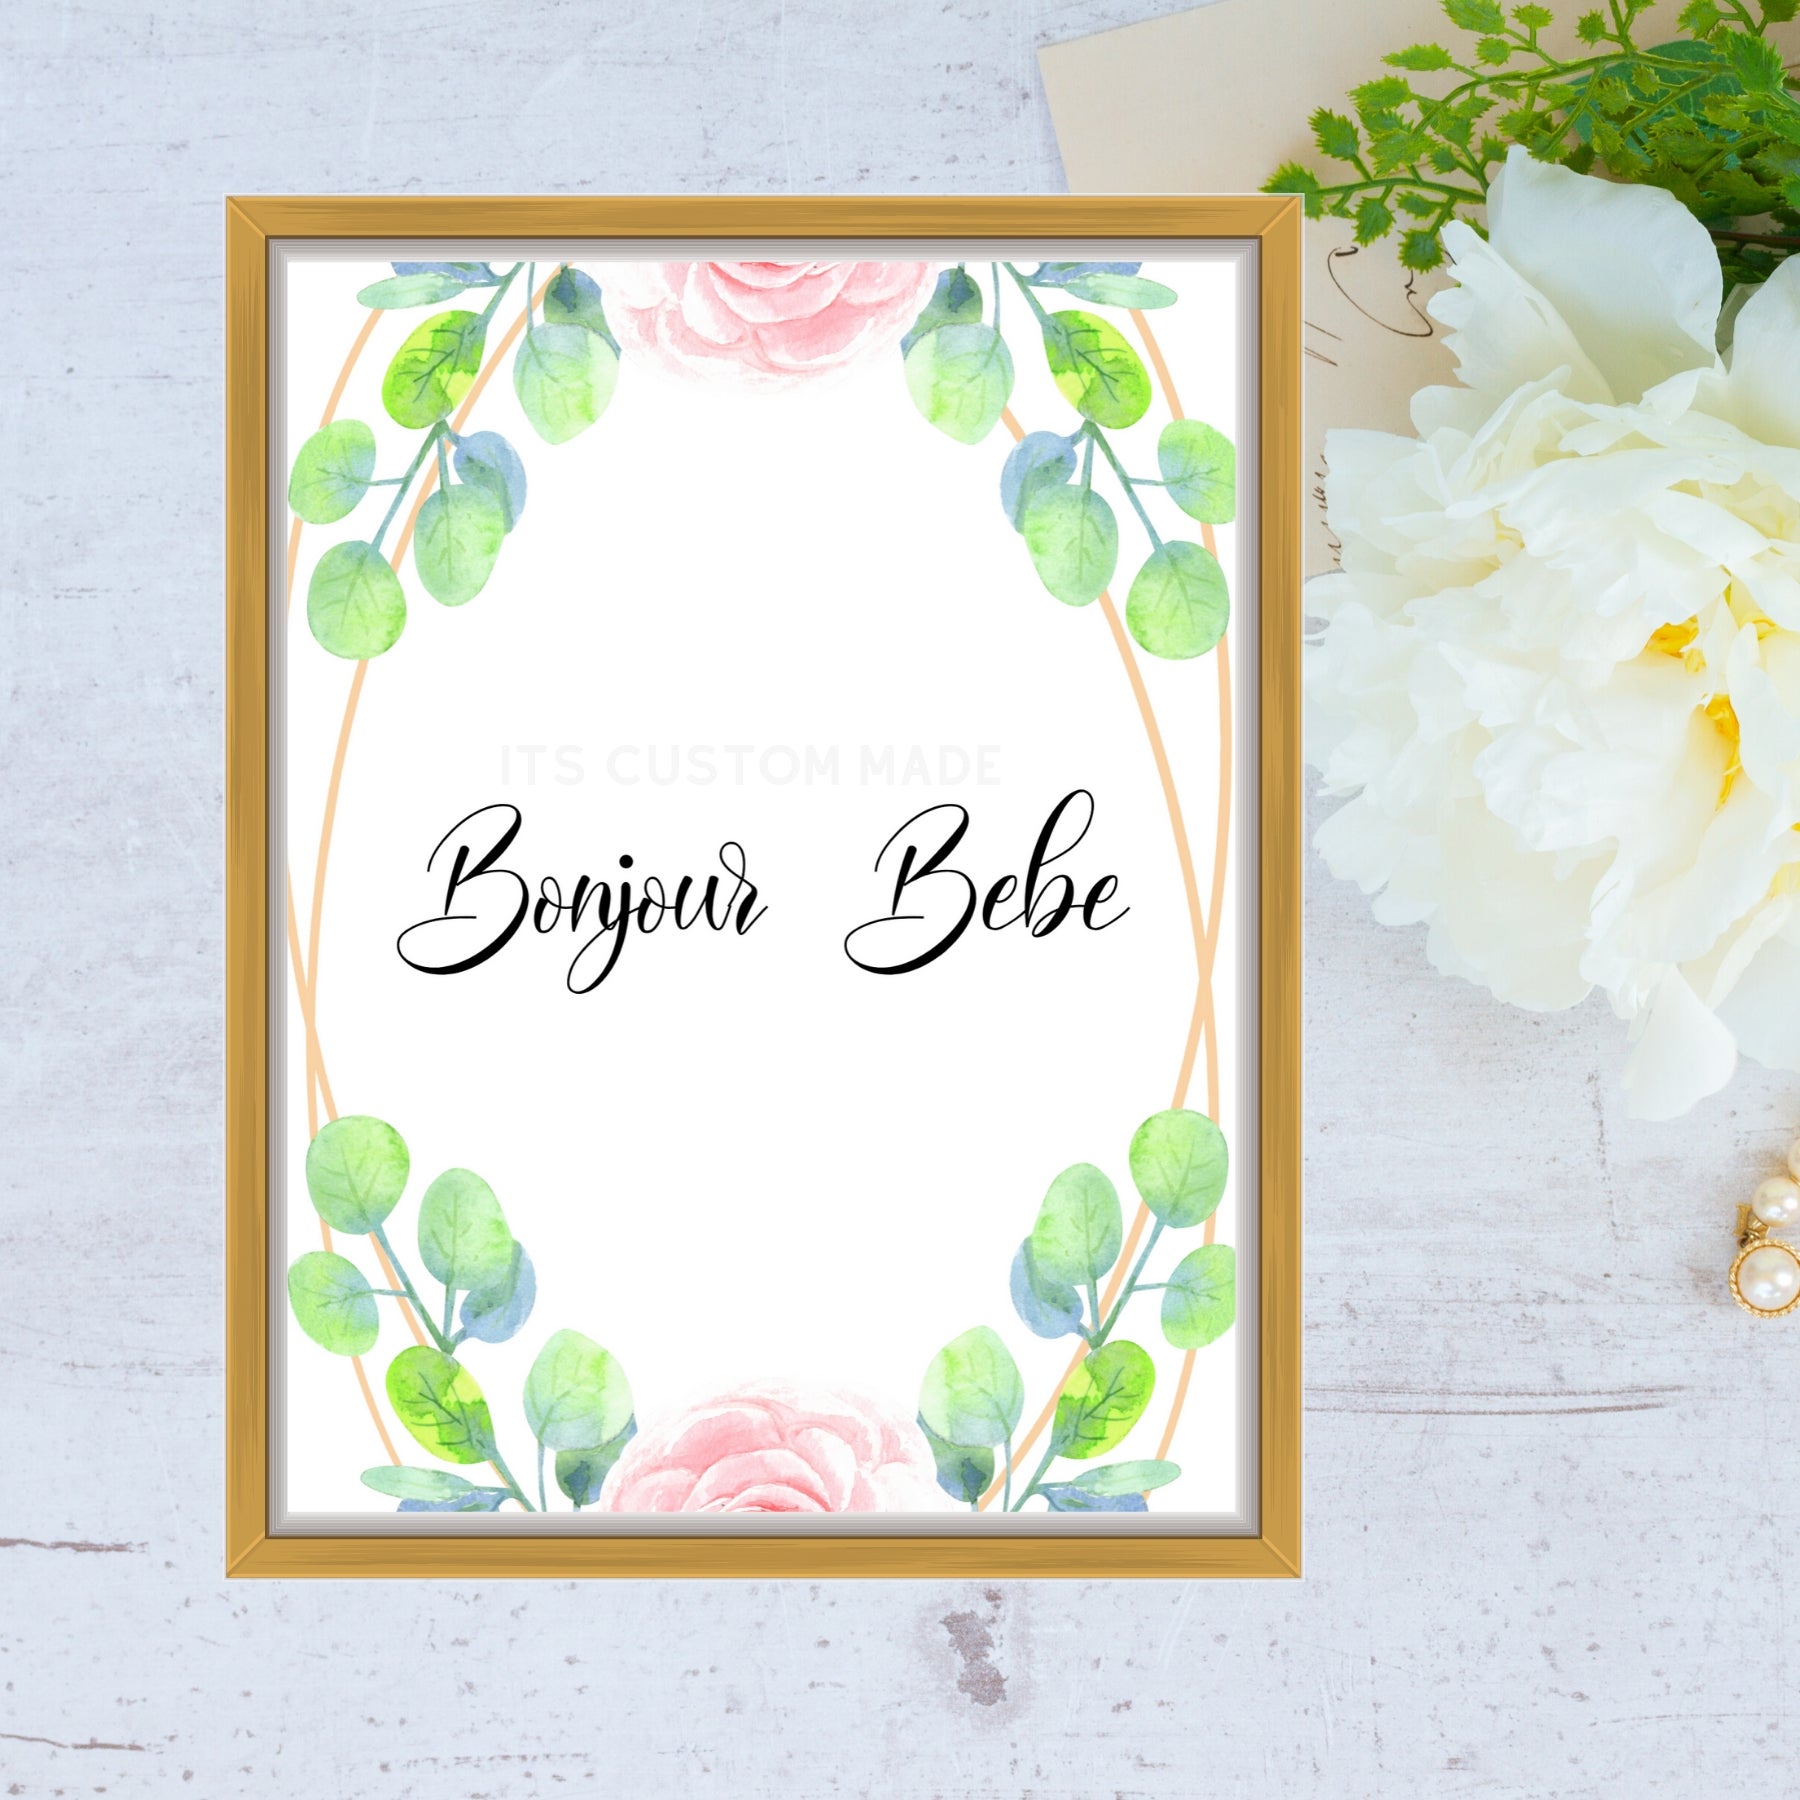 Bonjour Bebe Baby Party Shower Wall Art Sign - French Baby Shower Wall Art Decorations - Blue and Green Baby Shower Decor Sign - French Market Baby Shower Wall Art Printable Signage